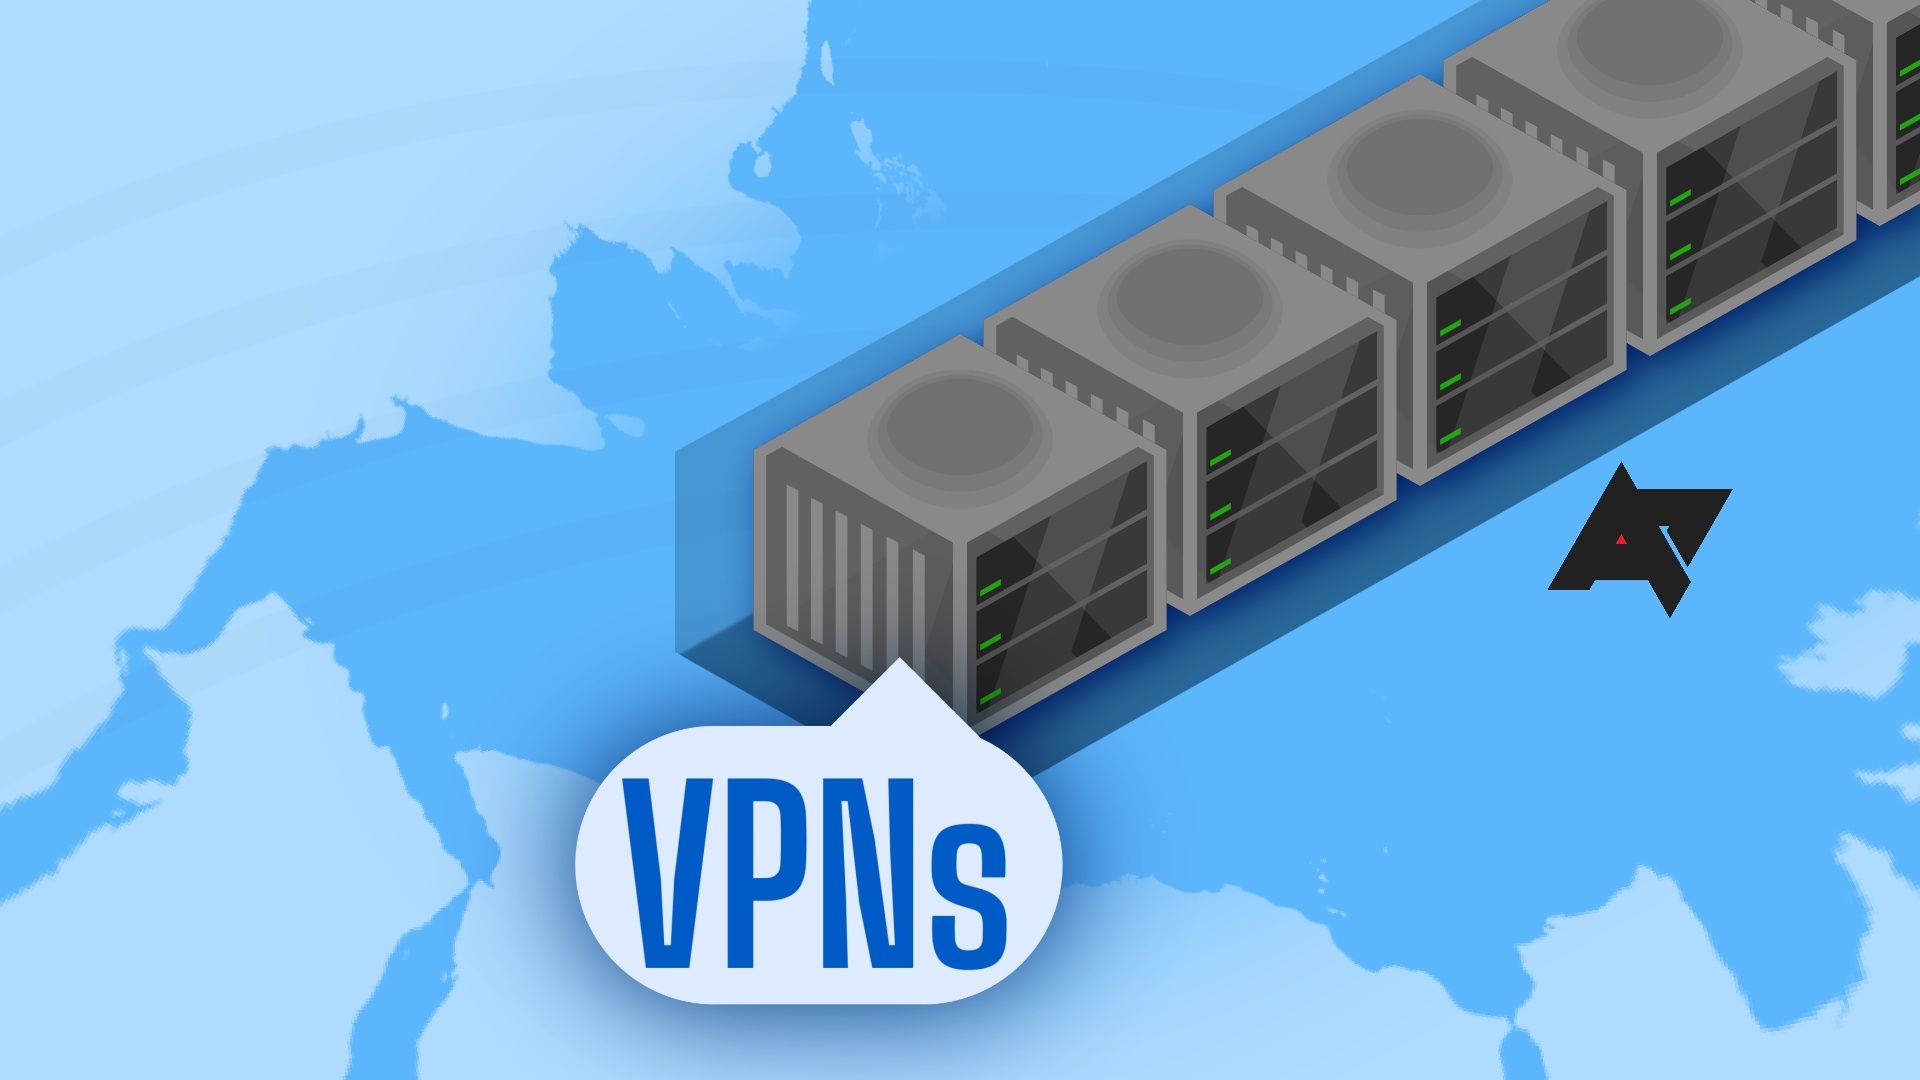 A cartoon image of VPN servers on top of a map, with a speech bubble saying 'VPNs' and the Android Police logo